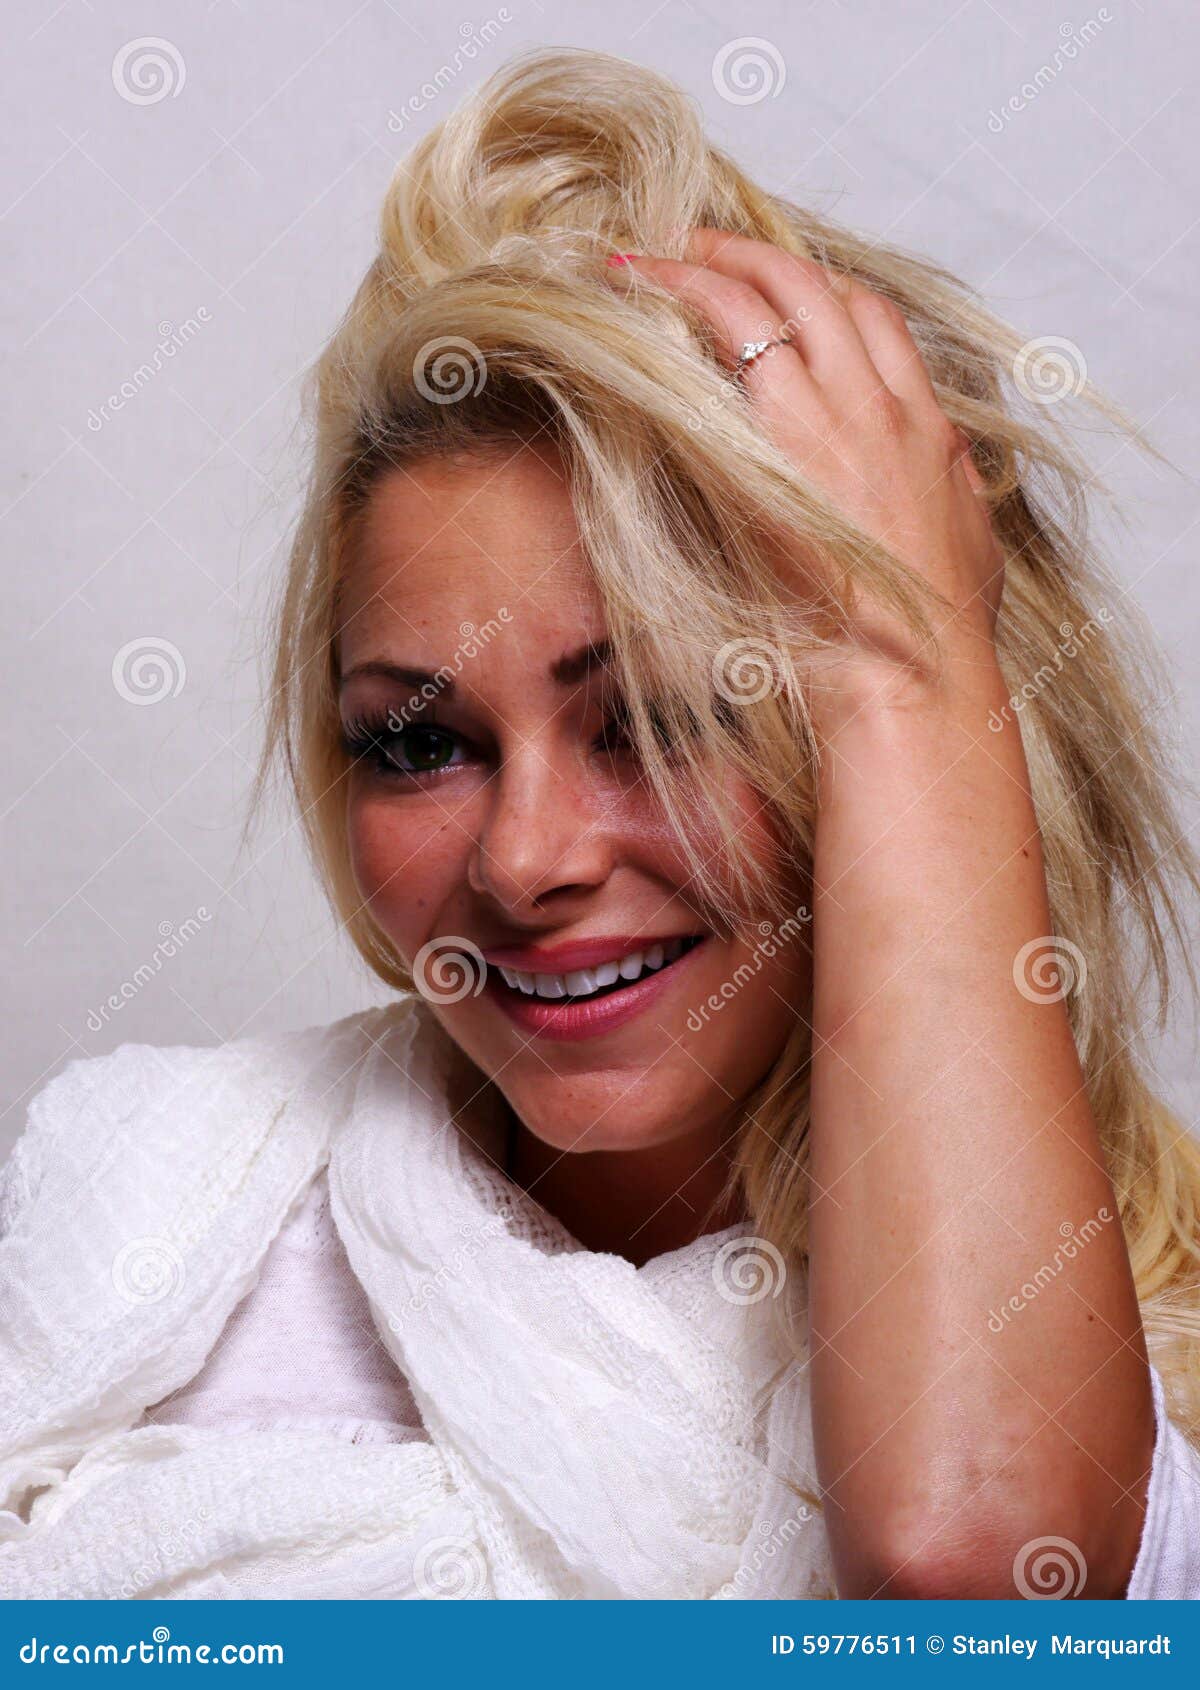 A Smiling Blond Haired Woman Is Looking Into The Camera Stock Image Image Of Pretty